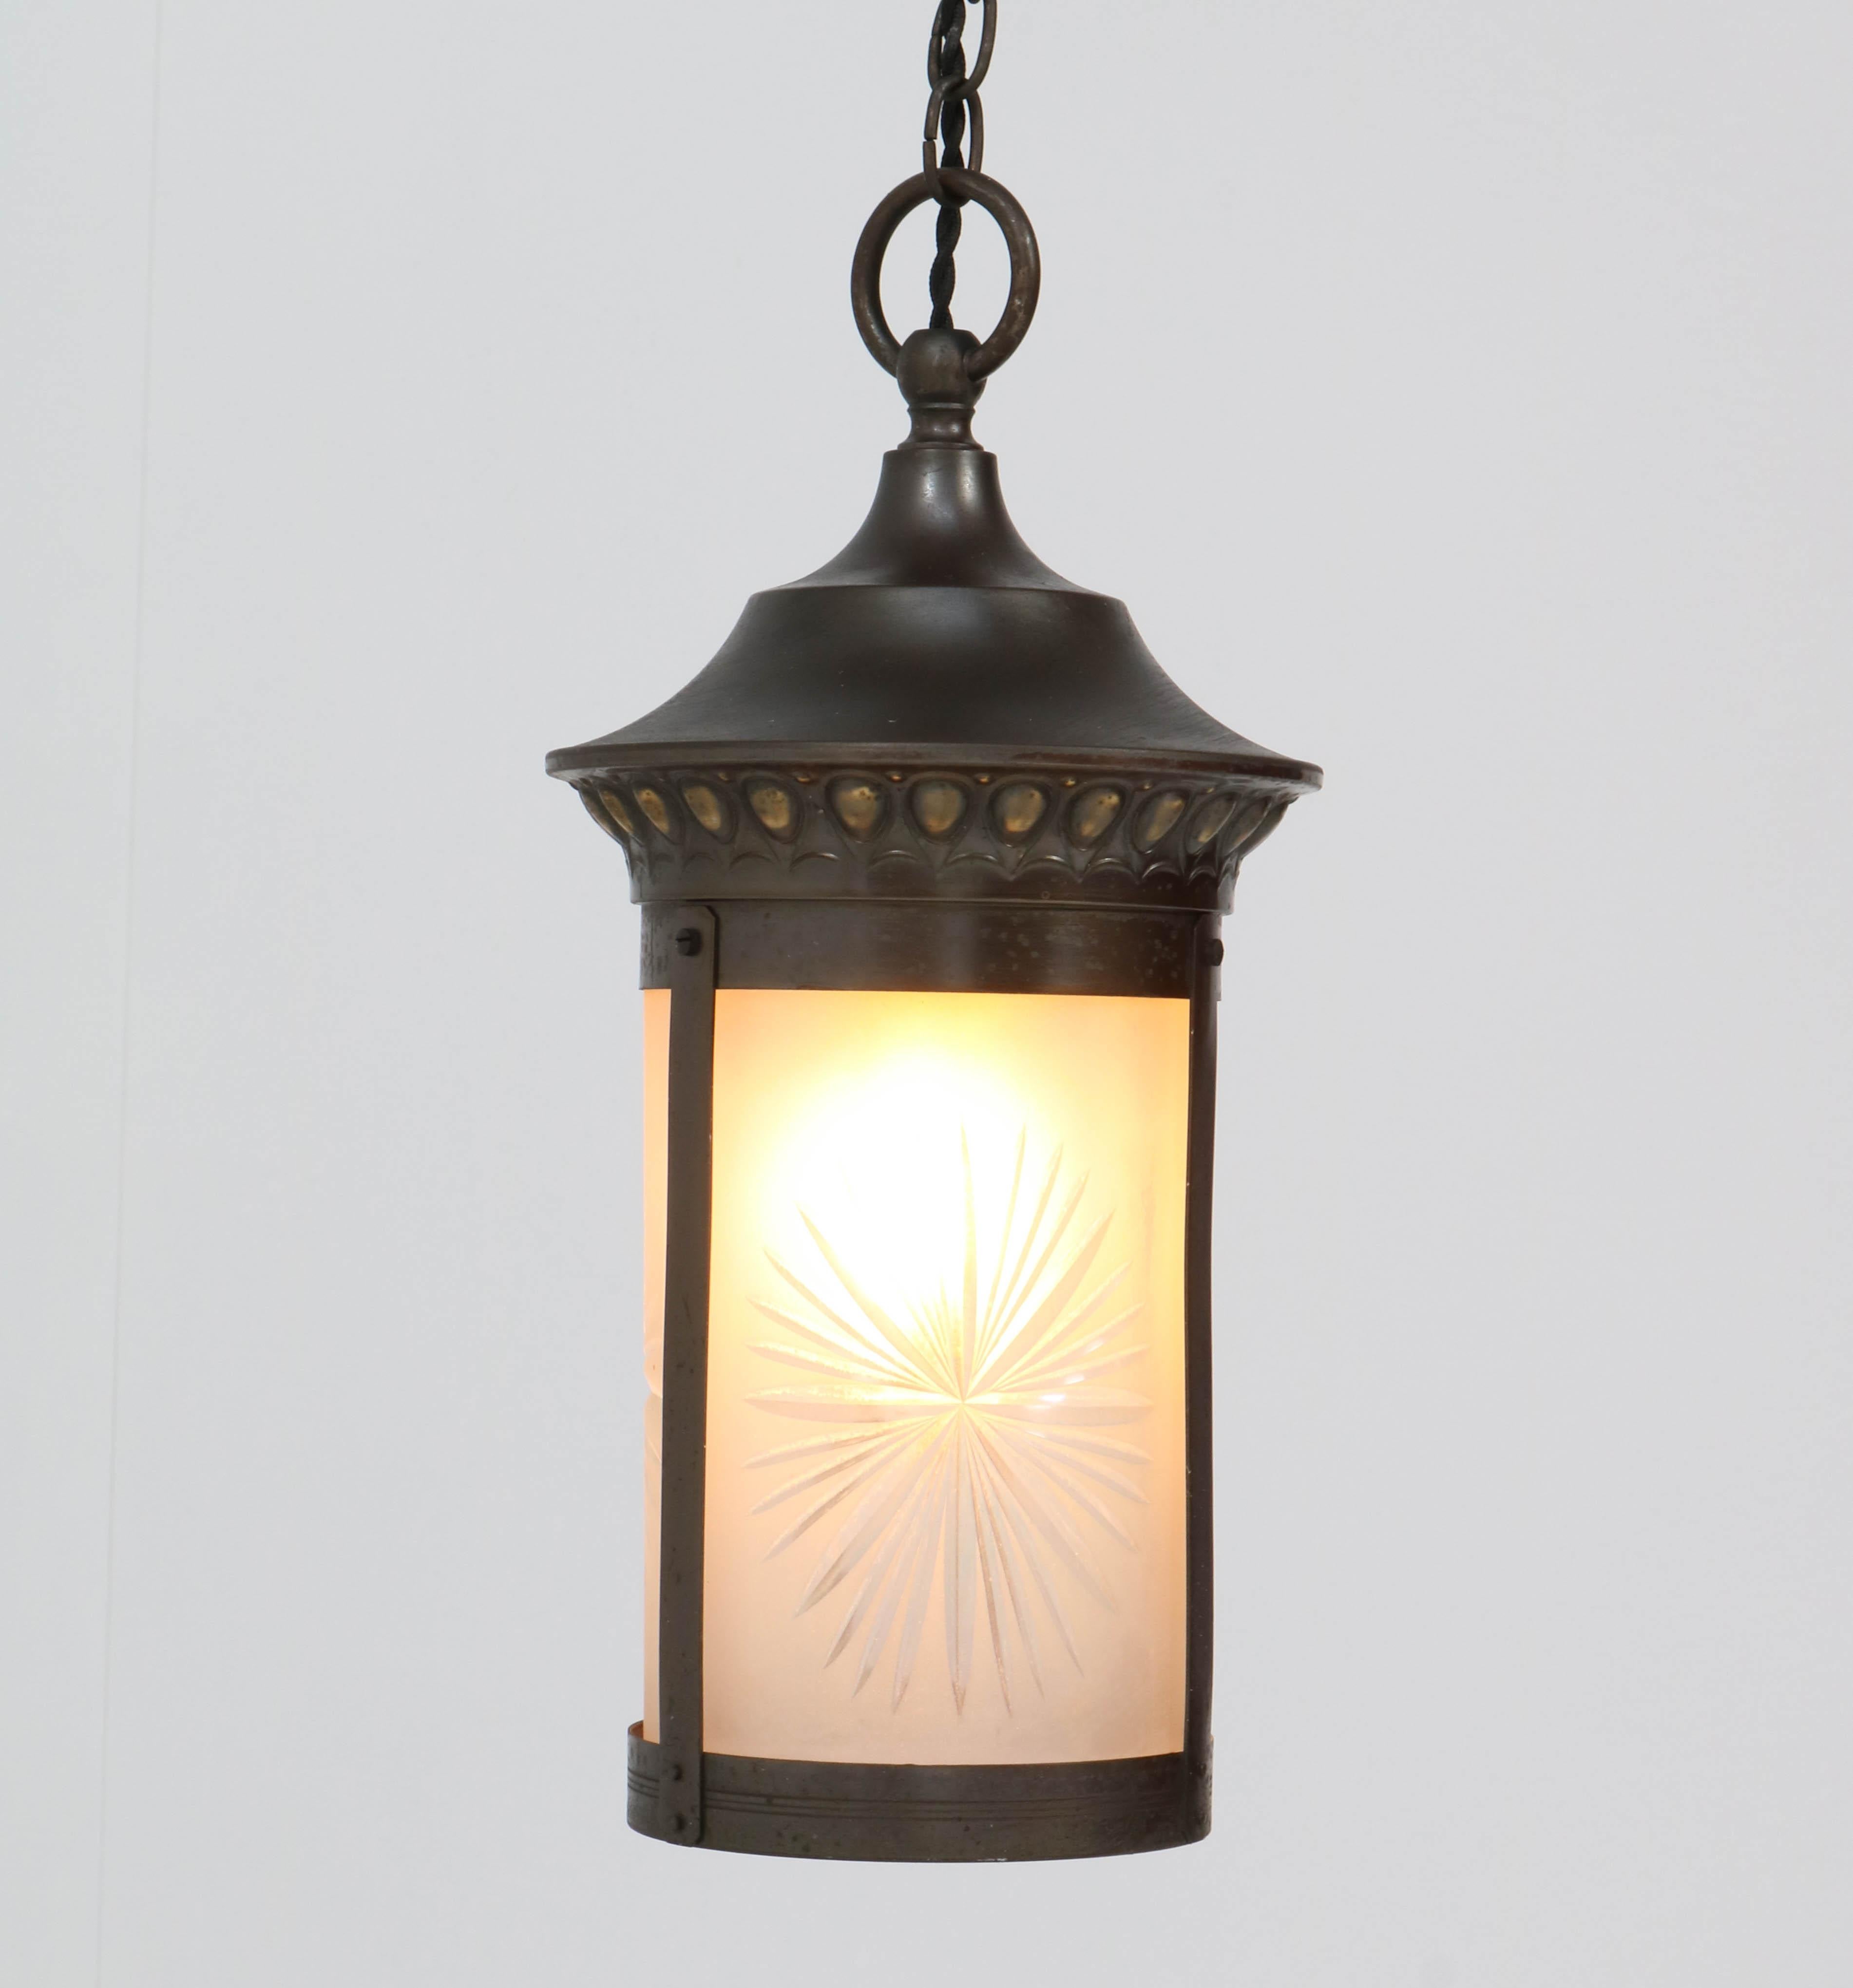 Patinated Brass Art Nouveau Lantern with Etched Glass, 1900s For Sale 3